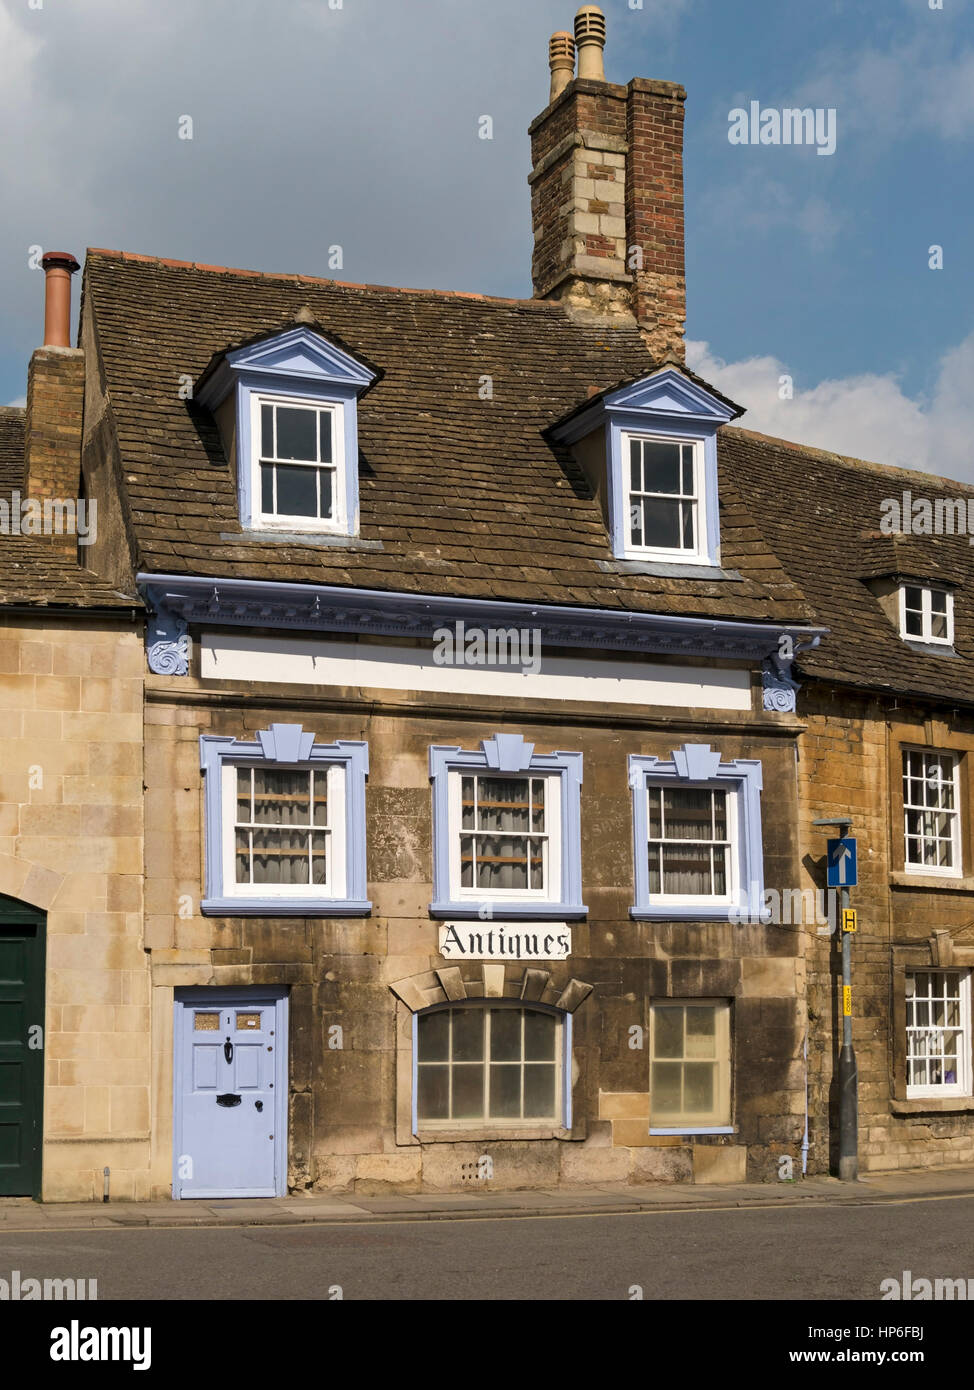 Old Antique shop cottage, St. George's Square, Stamford, Lincolnshire, England, UK Stock Photo